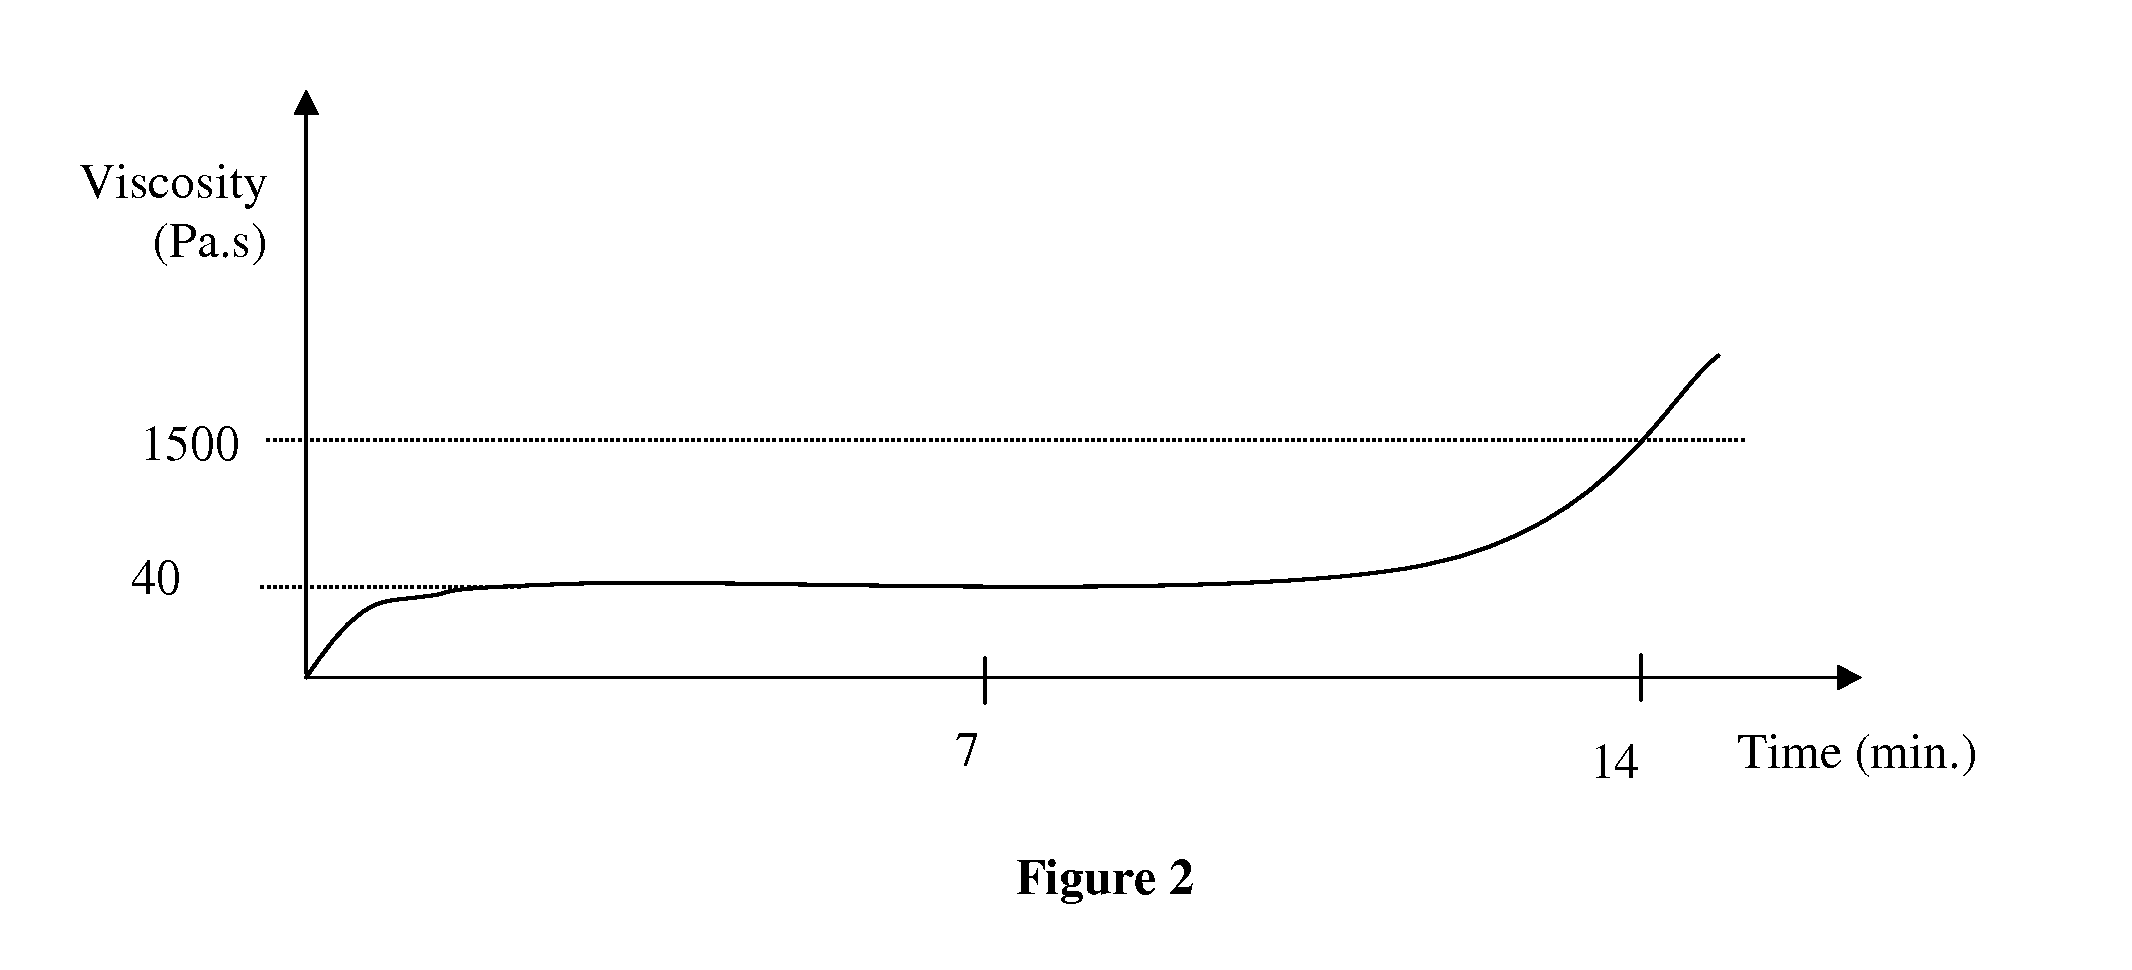 Polymer cement for percutaneous vertebroplasty and methods of using and making same